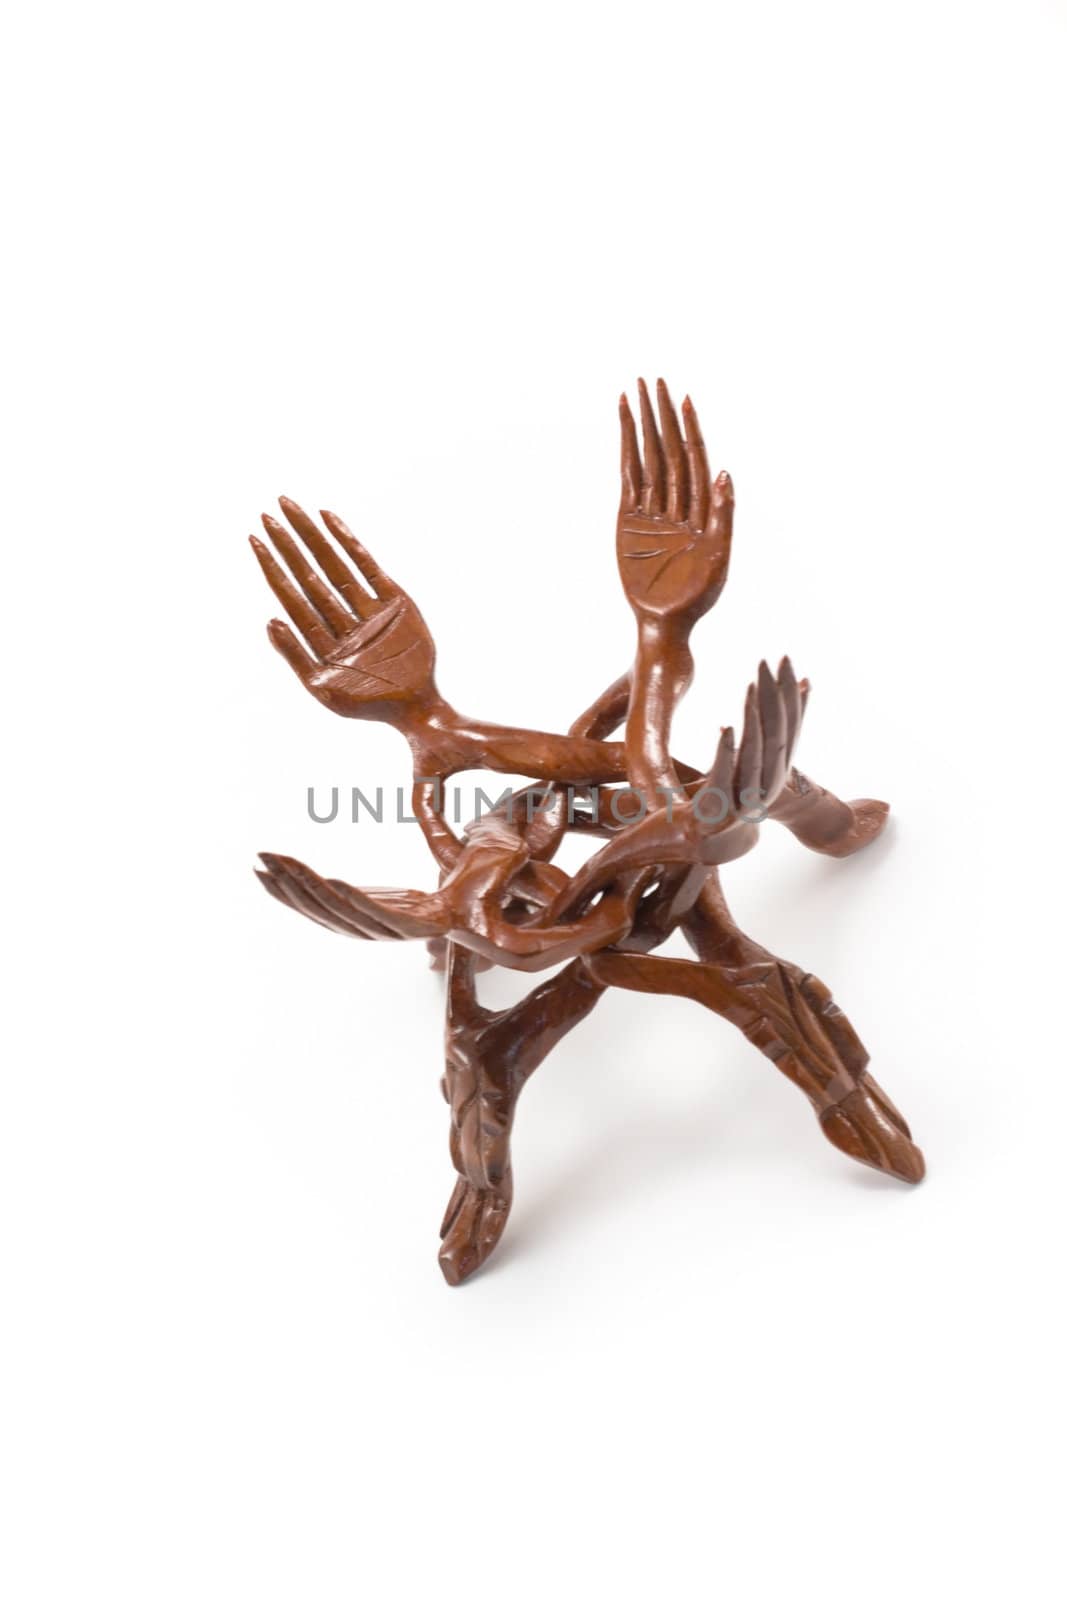 Wooden hands, decoration, insulated on white background